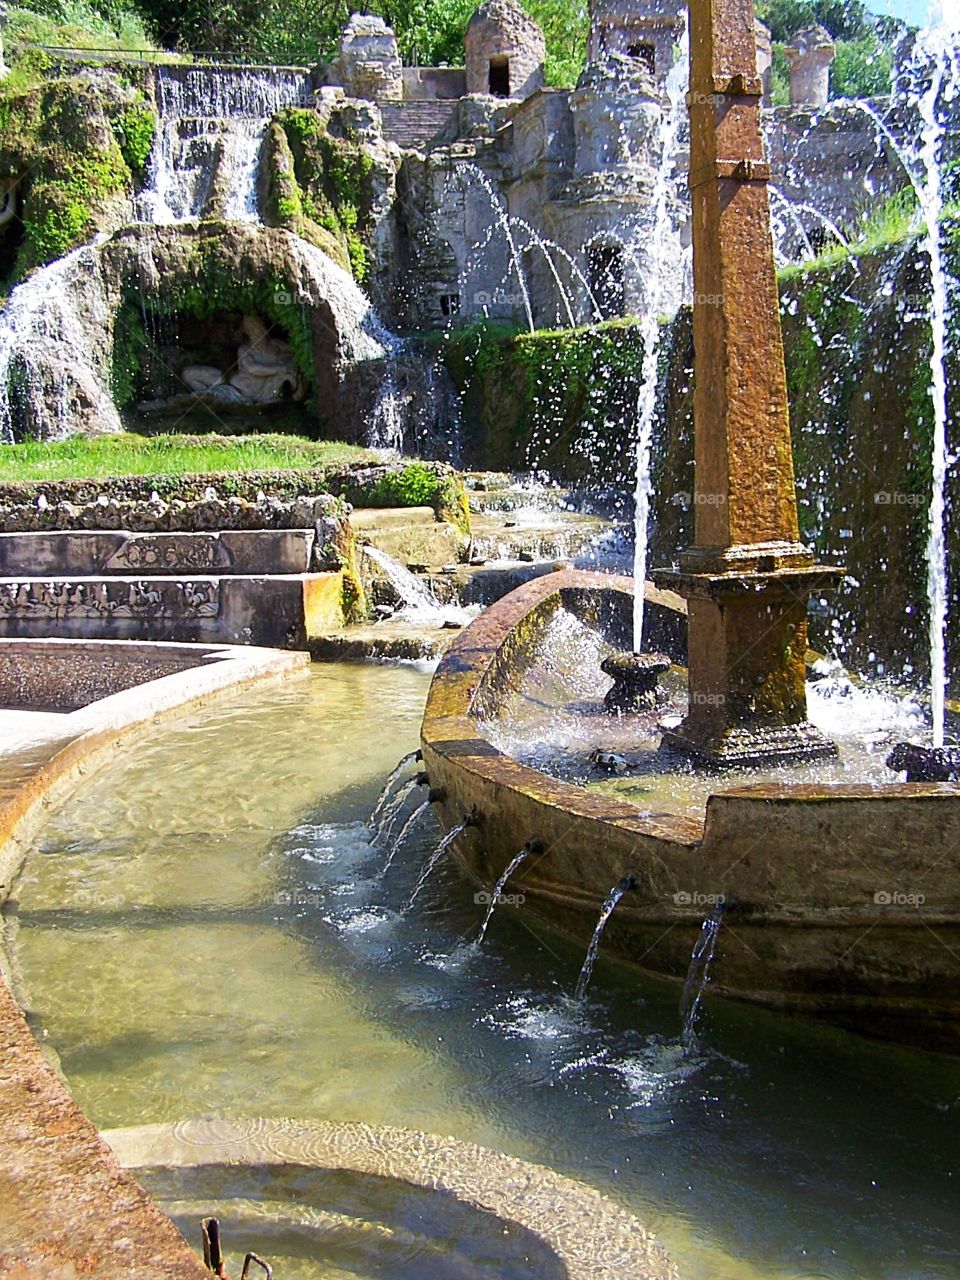 Series of fountains at the villa of Tivoli just outside Rome in Italy